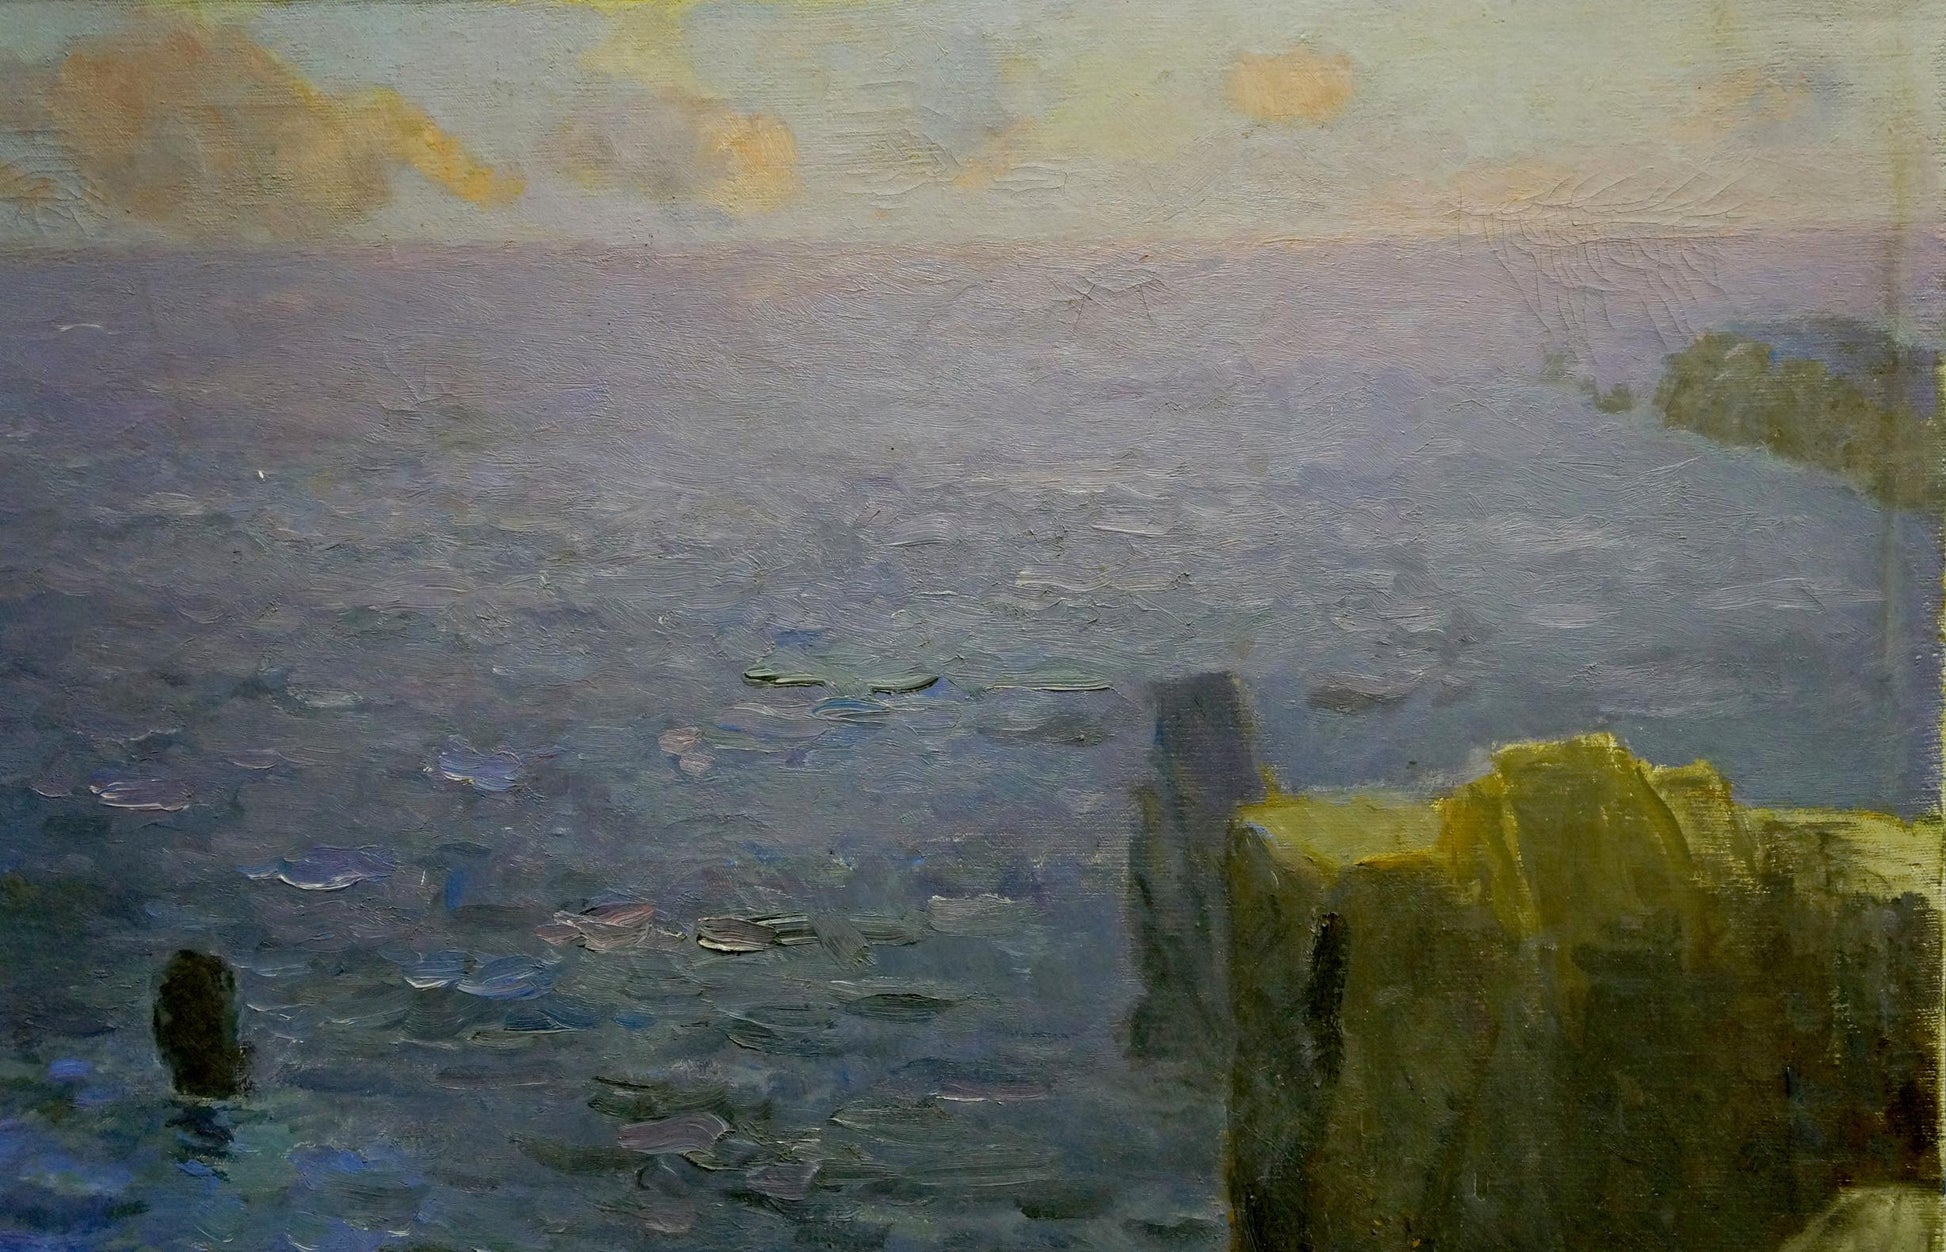 An oil painting capturing the loneliness amidst the sea